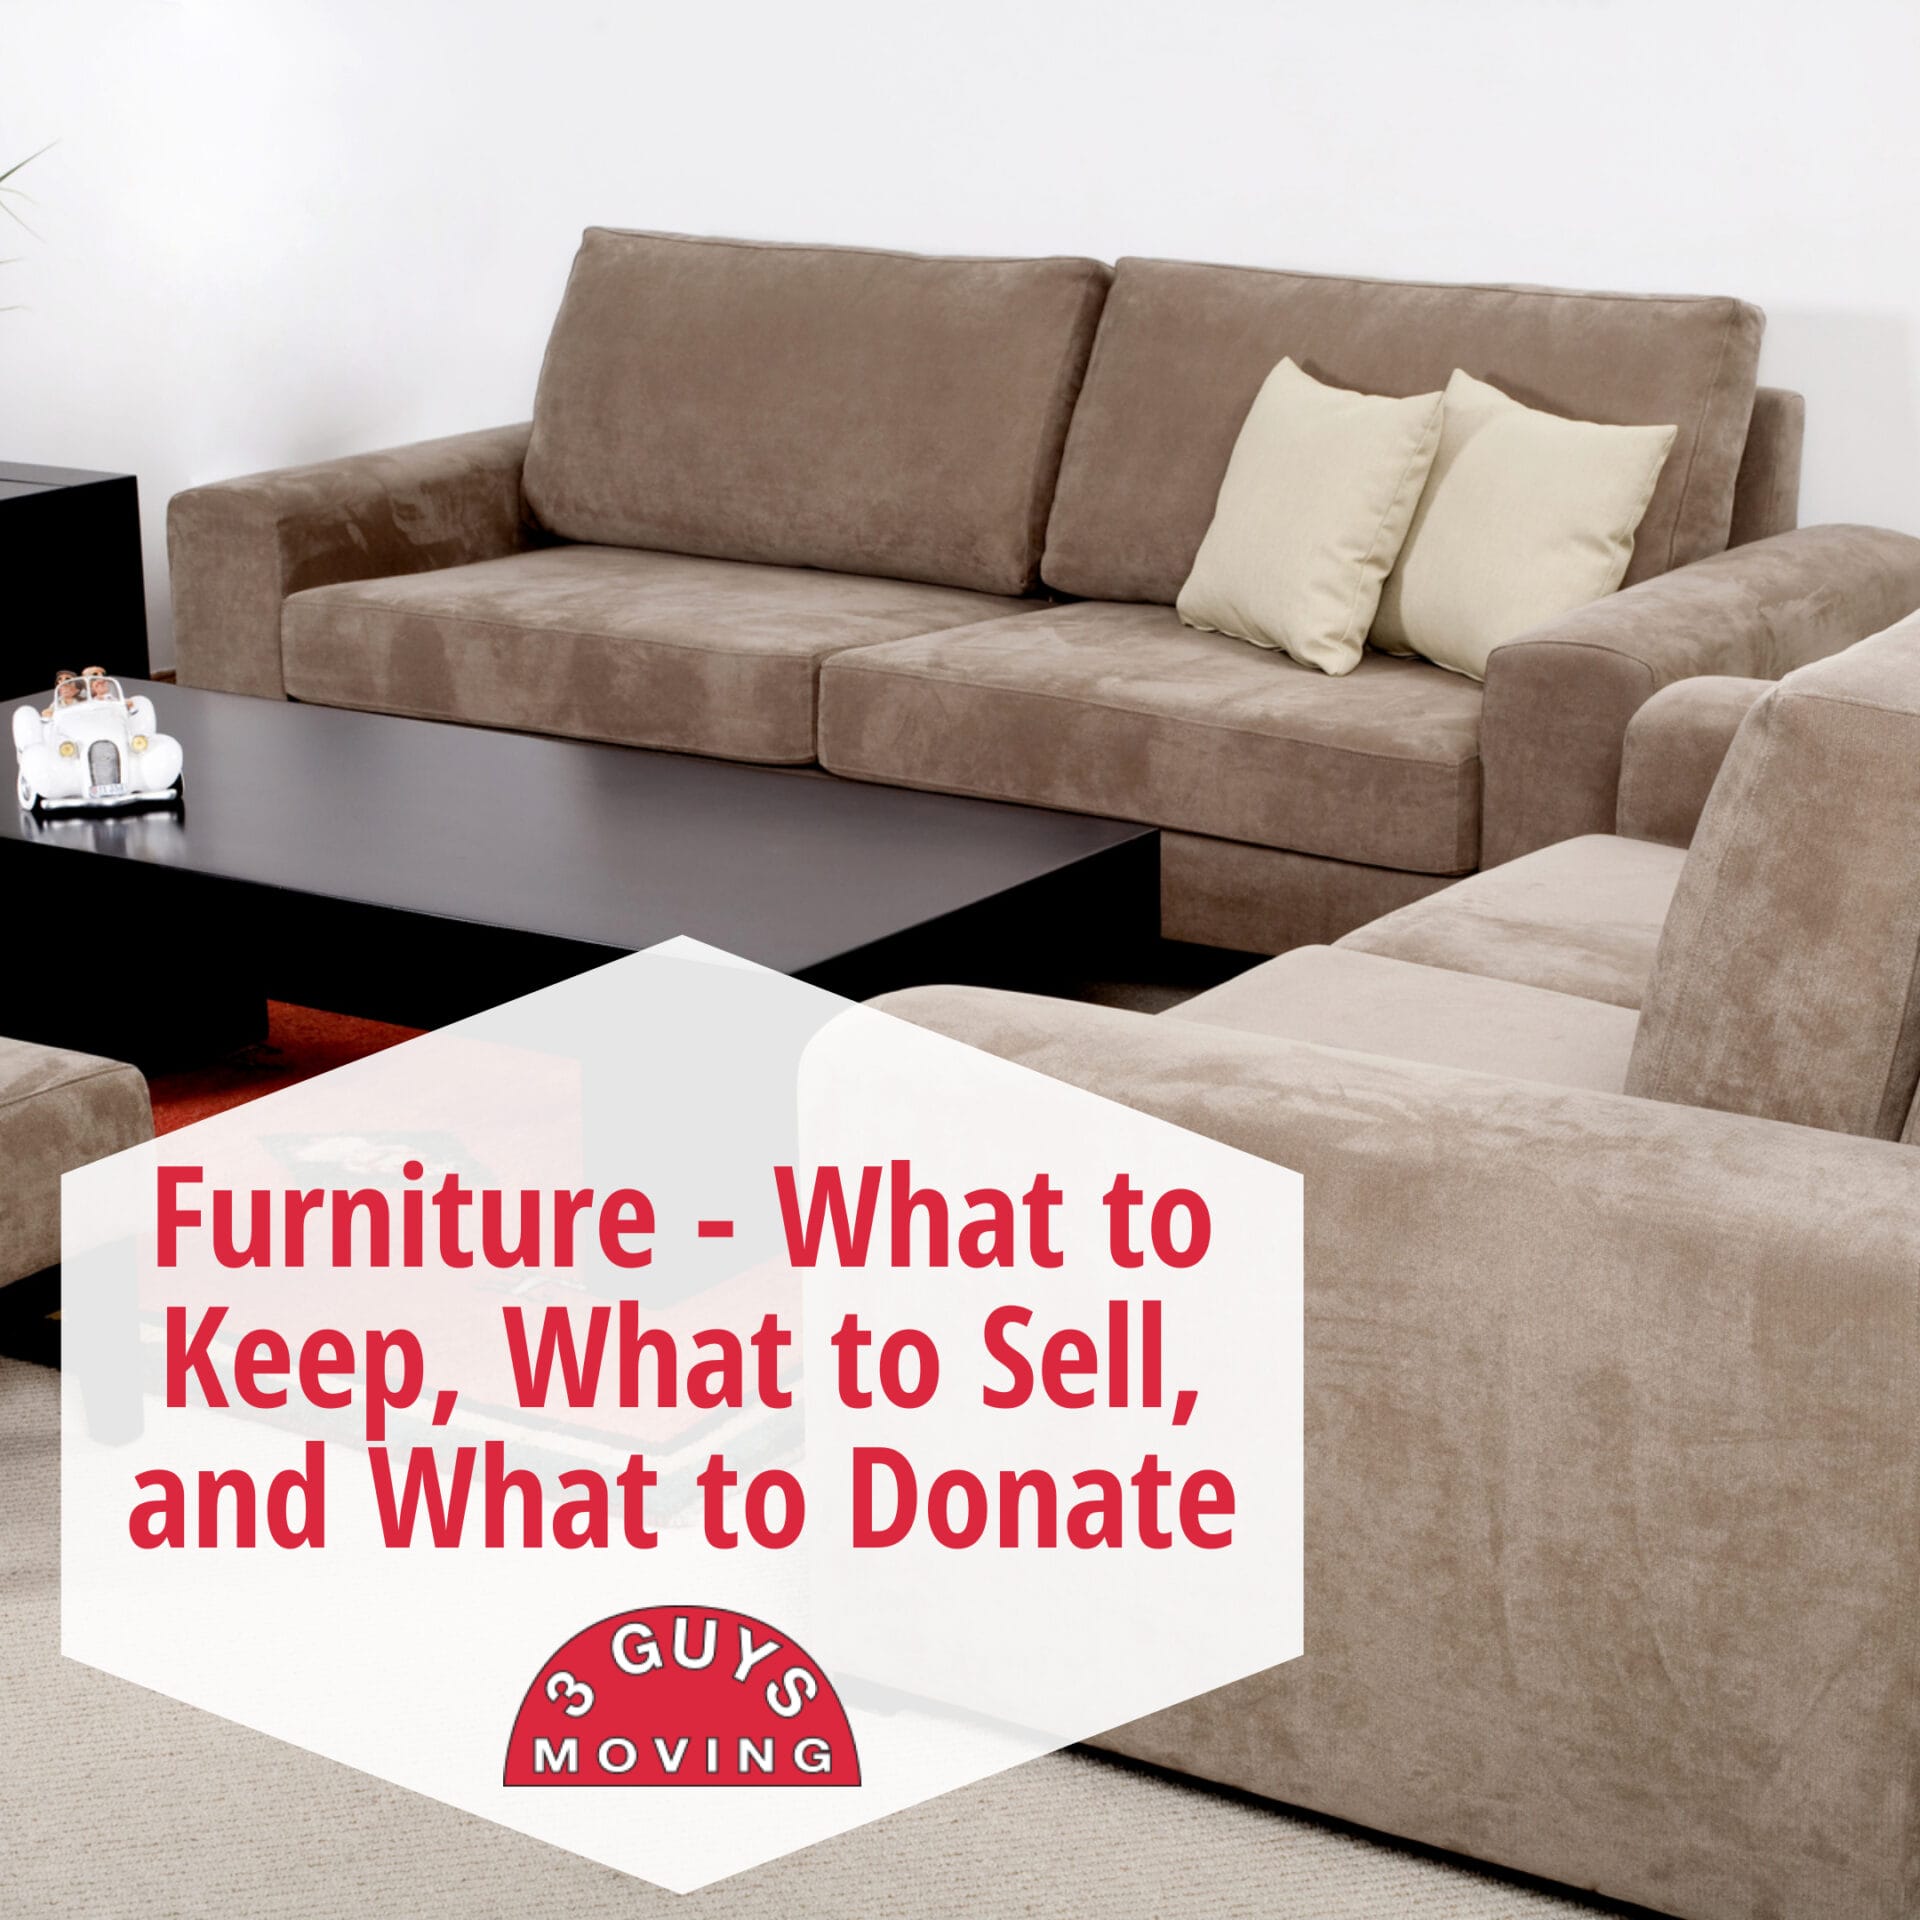 Furniture - What to Keep, What to Sell, and What to Donate